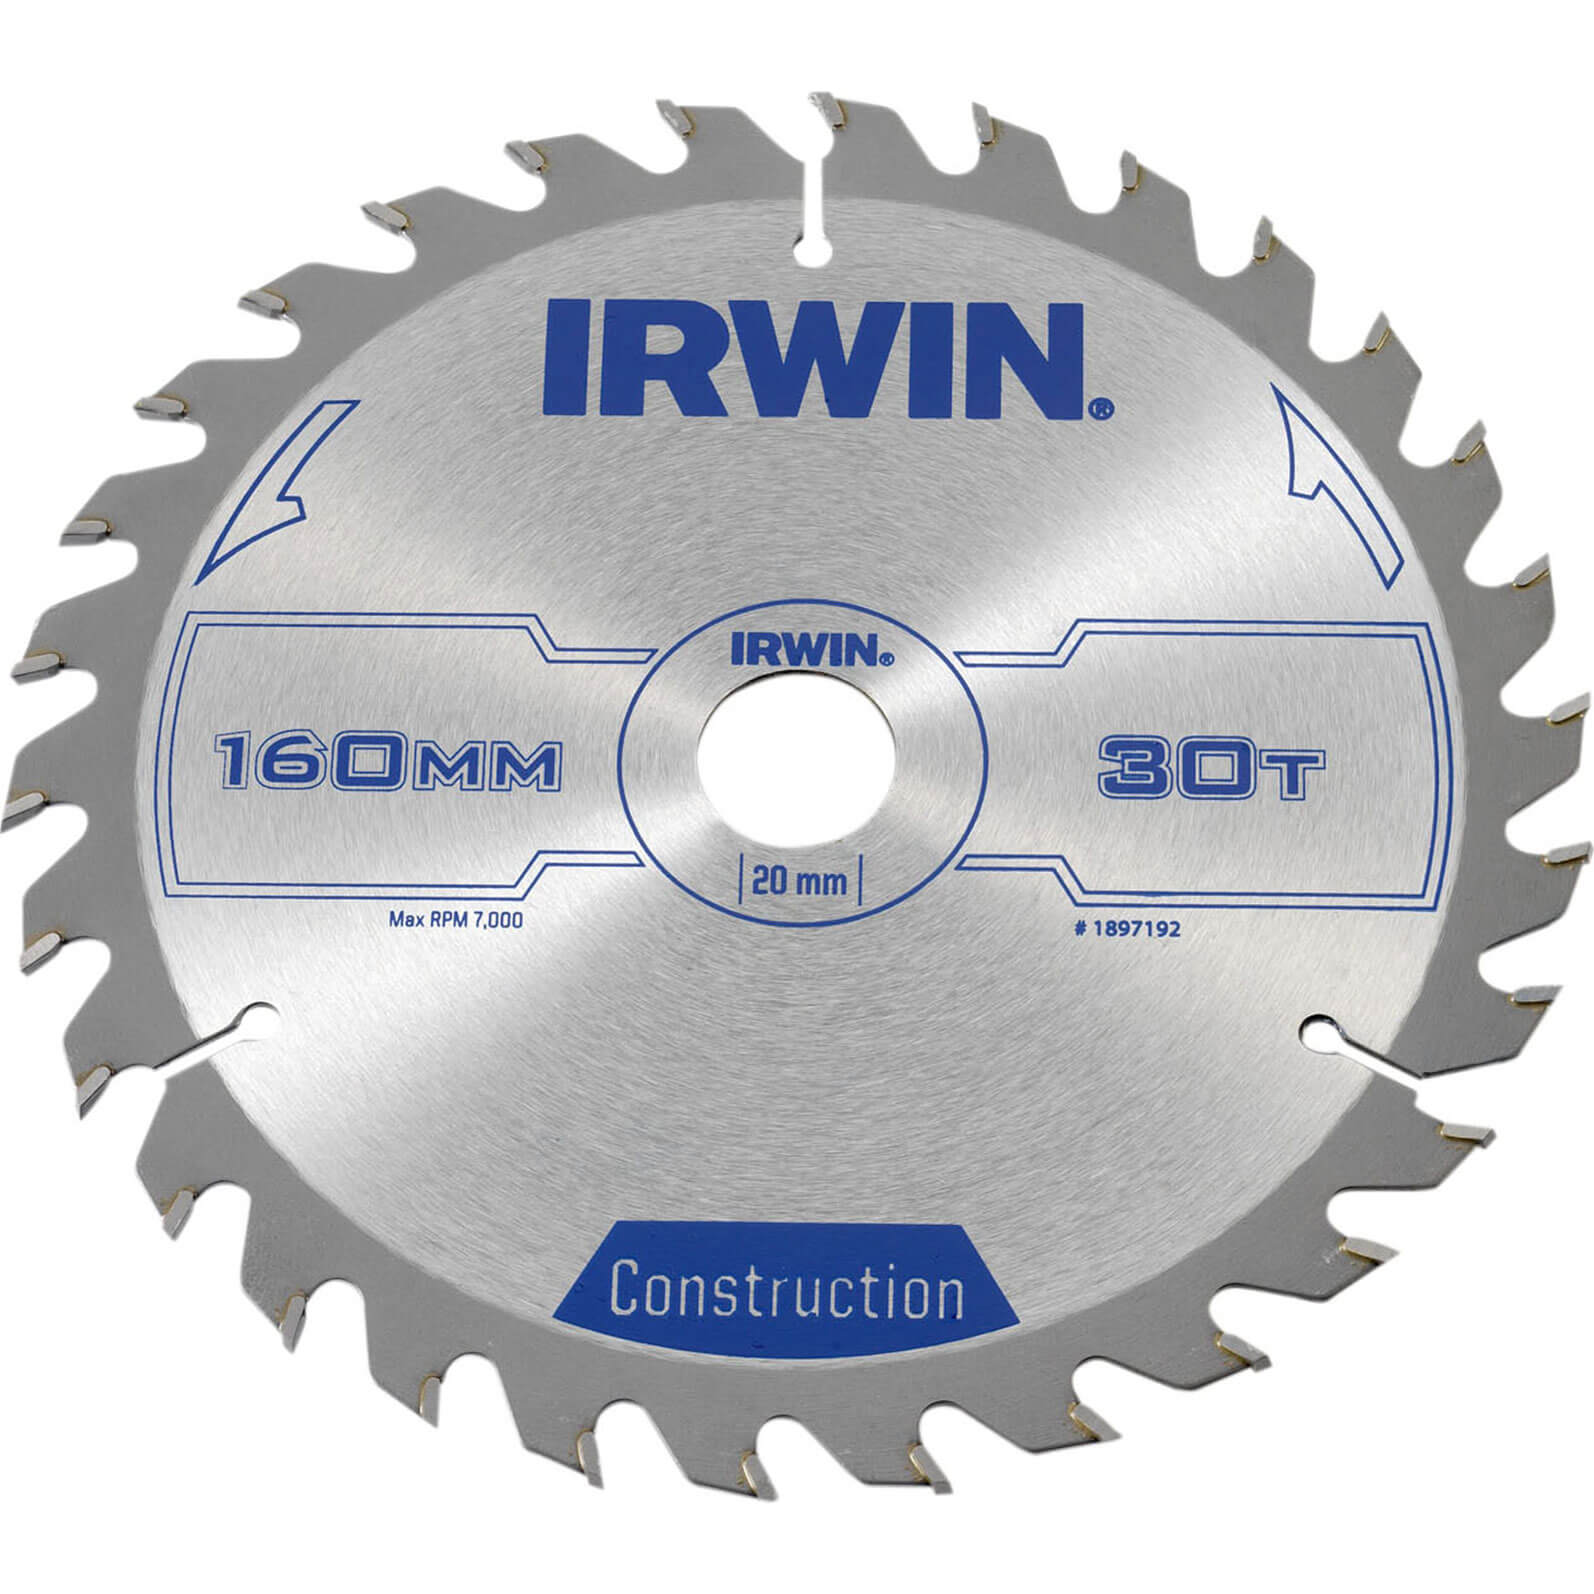 Photo of Irwin Atb Construction Circular Saw Blade 160mm 30t 20mm